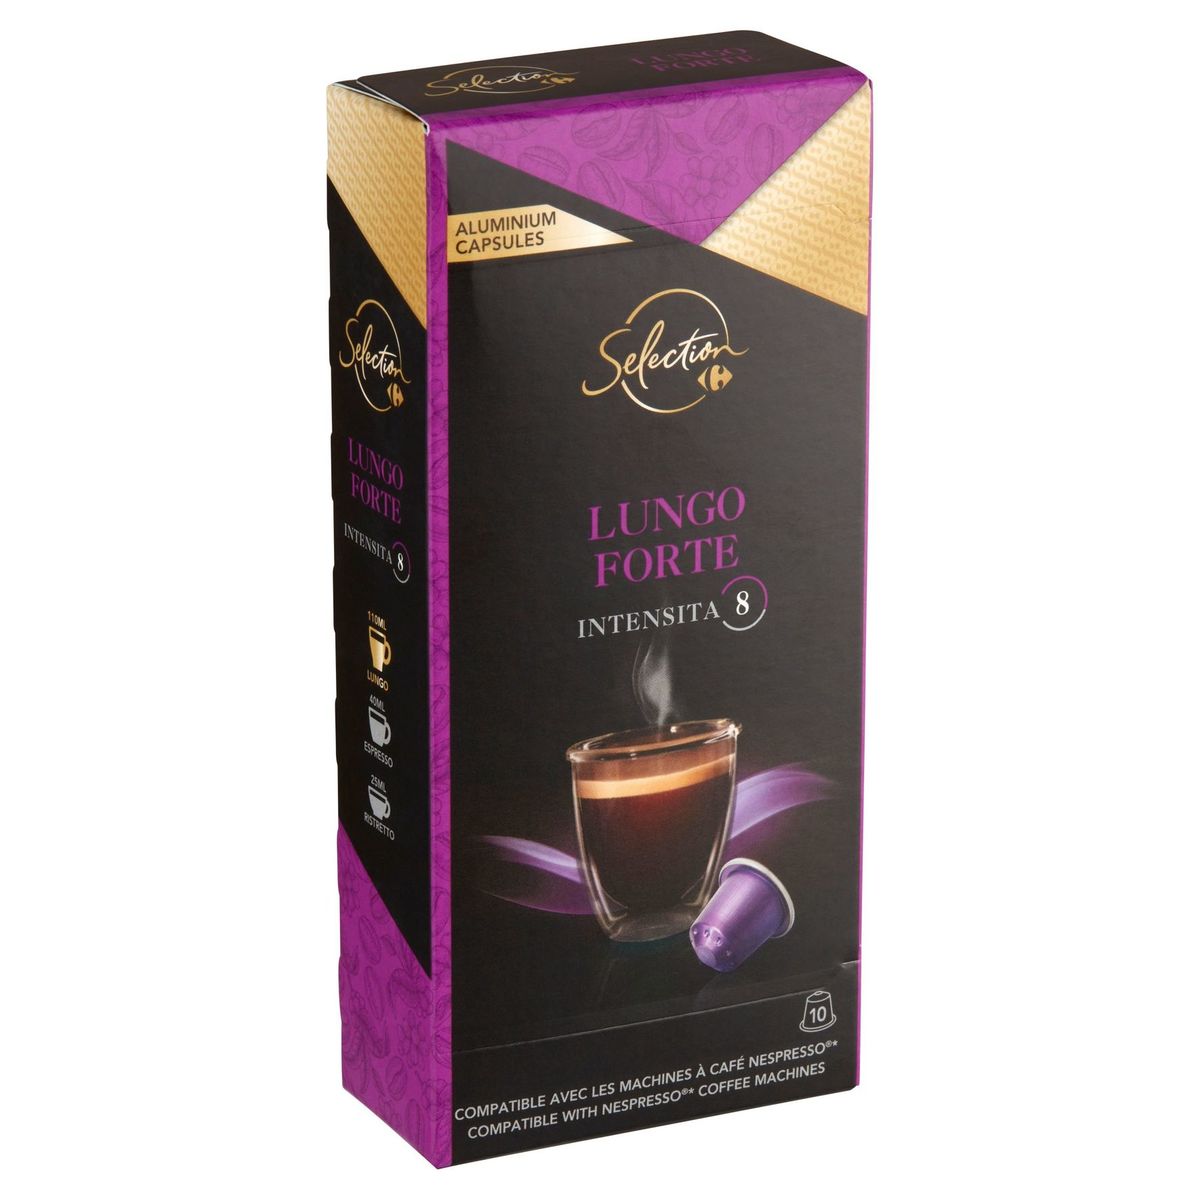 Carrefour Selection Lungo Forte 10 Capsules 52 g